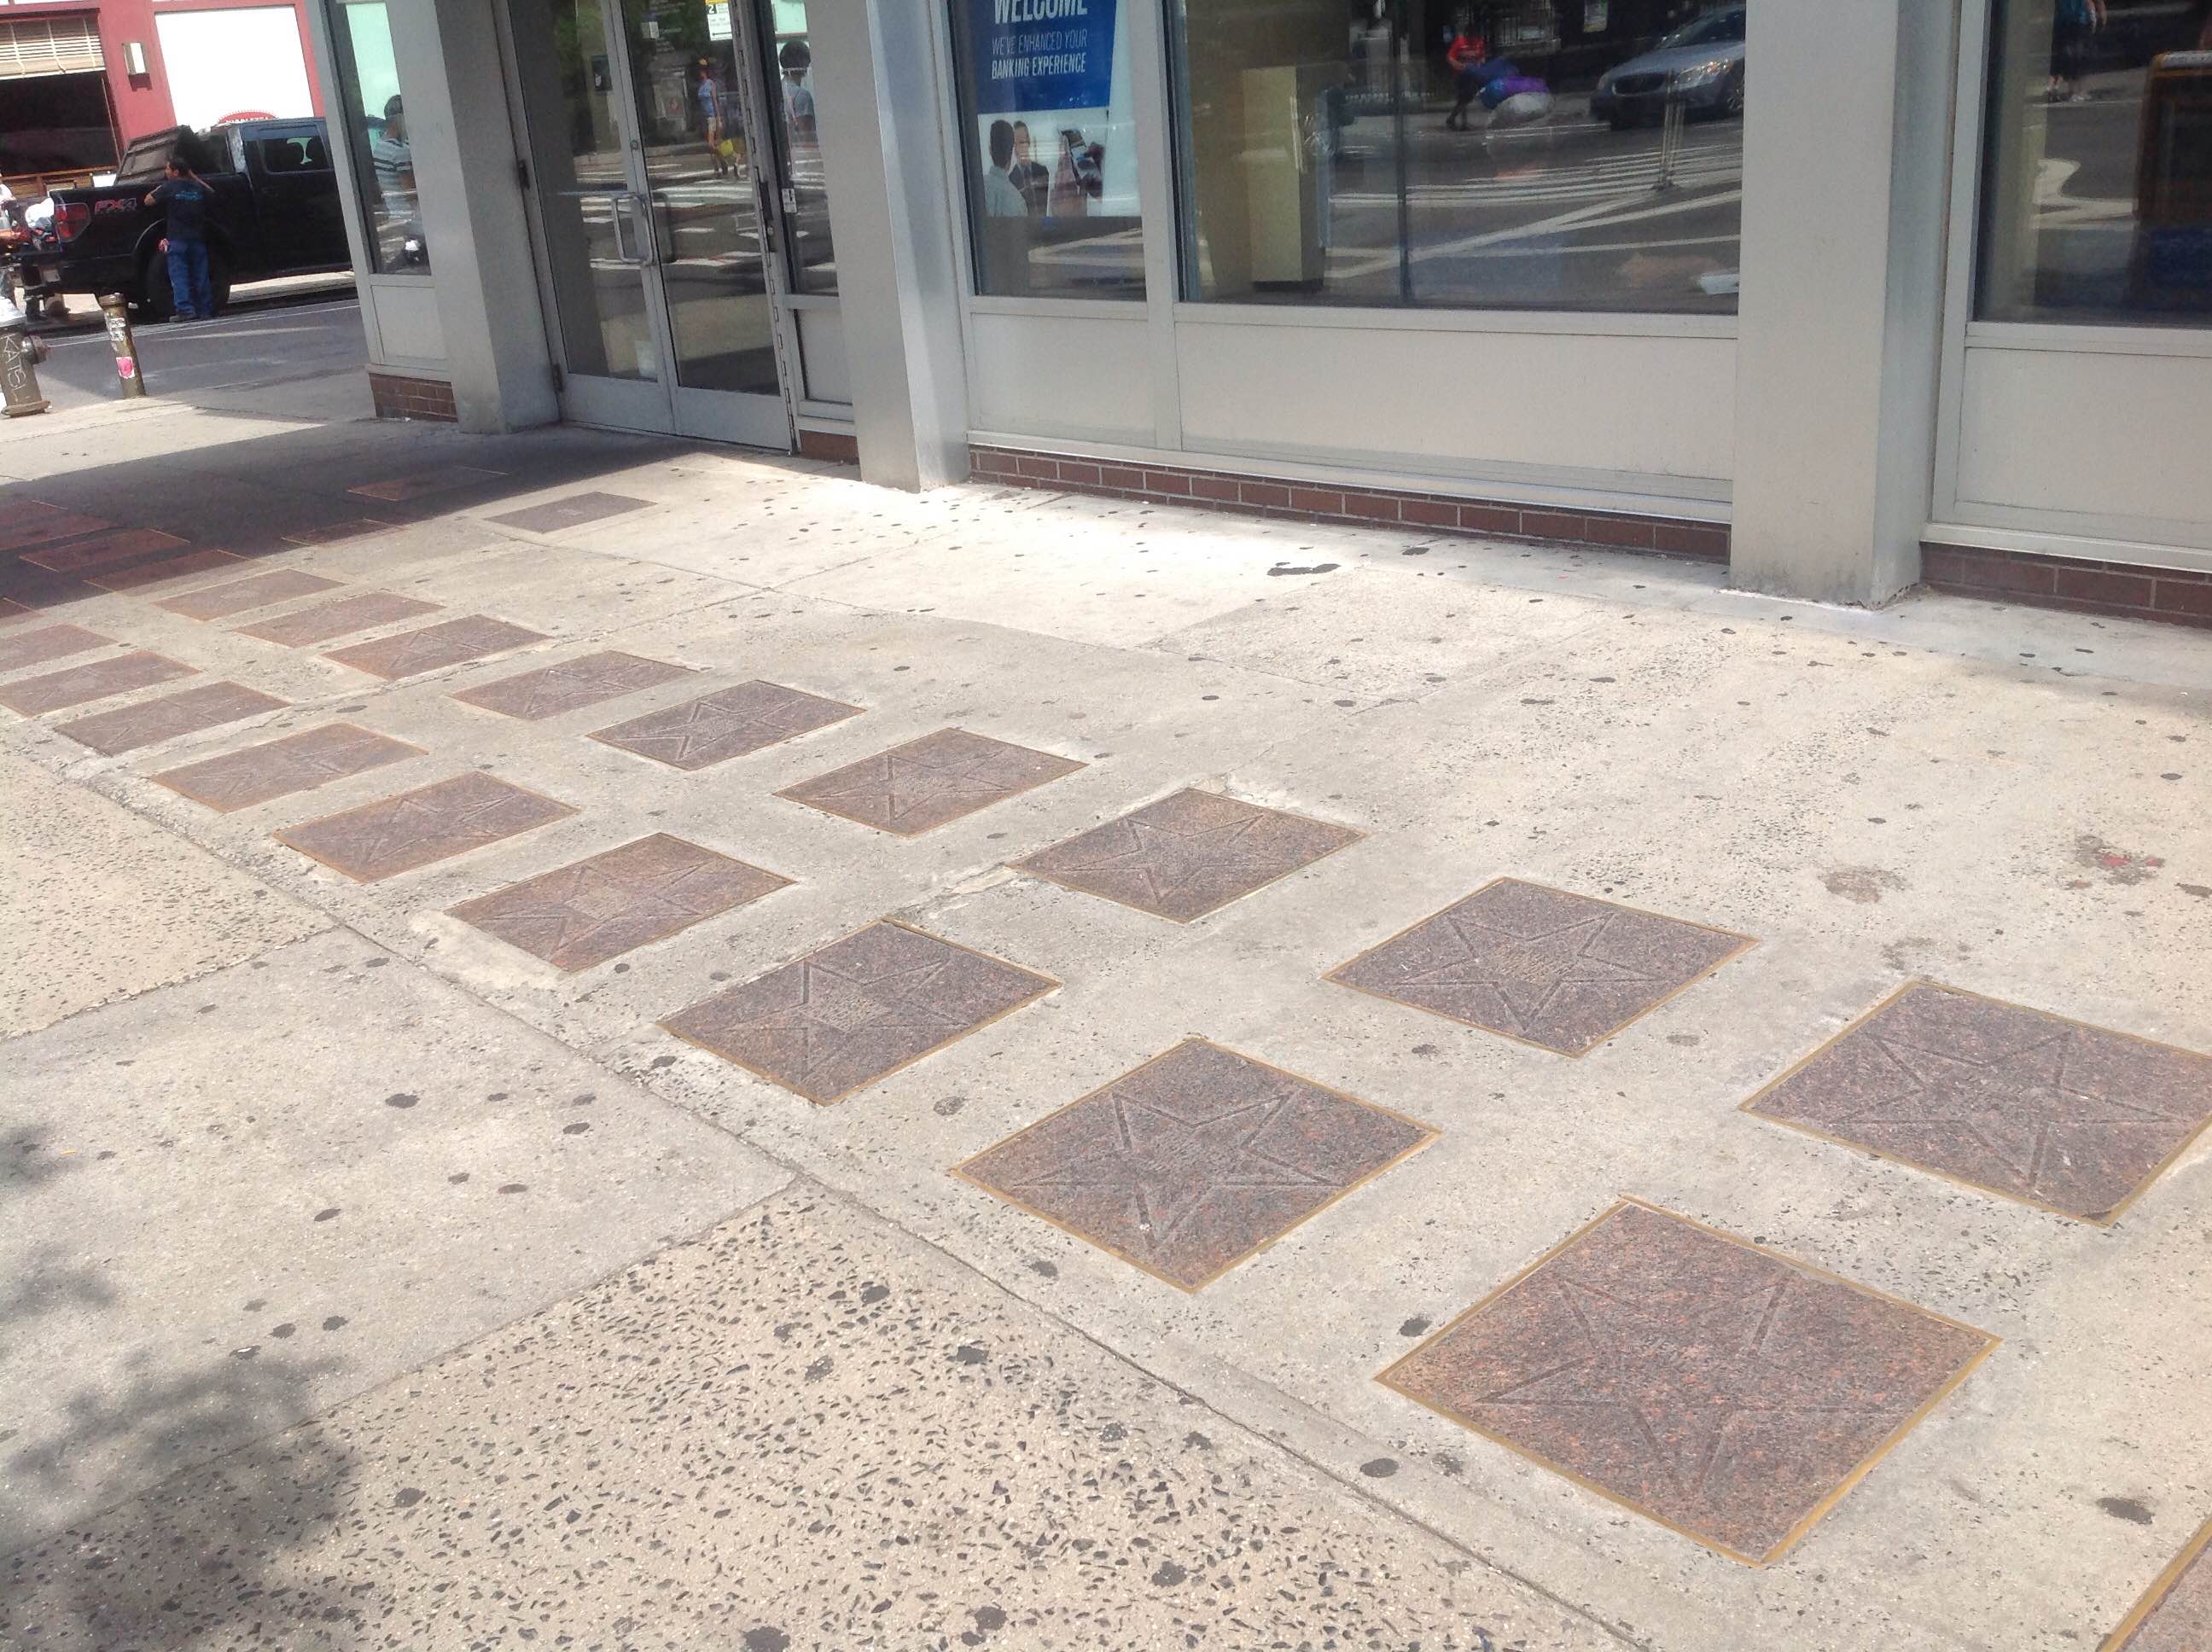 The walk of fame. Finkel is one of the two at the top.